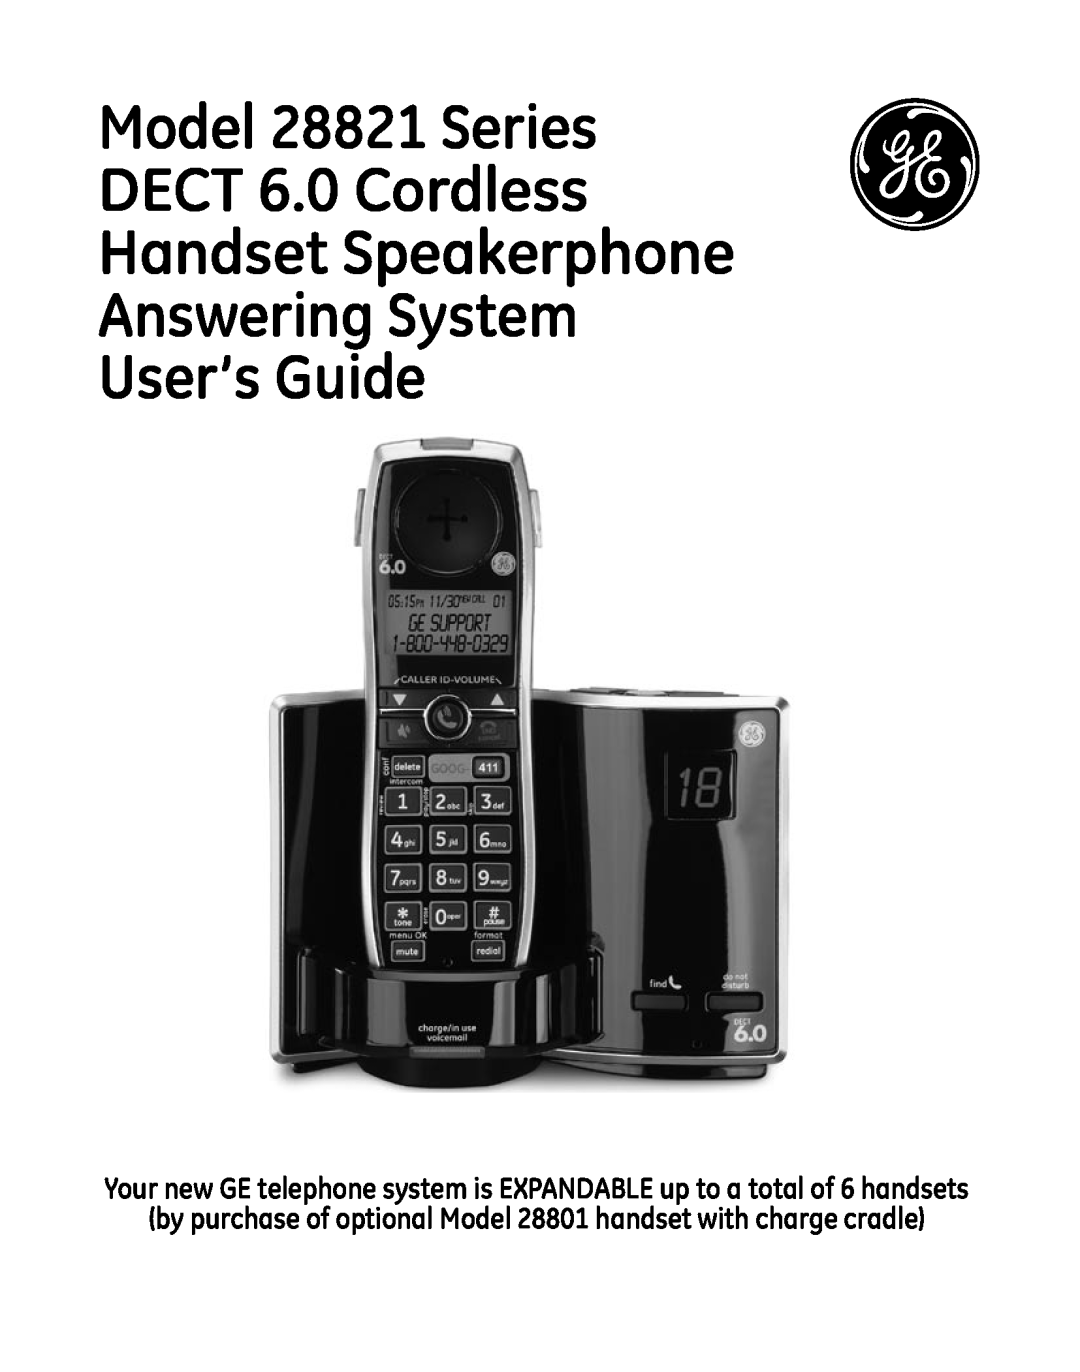 GE 28821xx4, 881, 0007 manual by purchase of optional Model 28801 handset with charge cradle, Answering System User’s Guide 